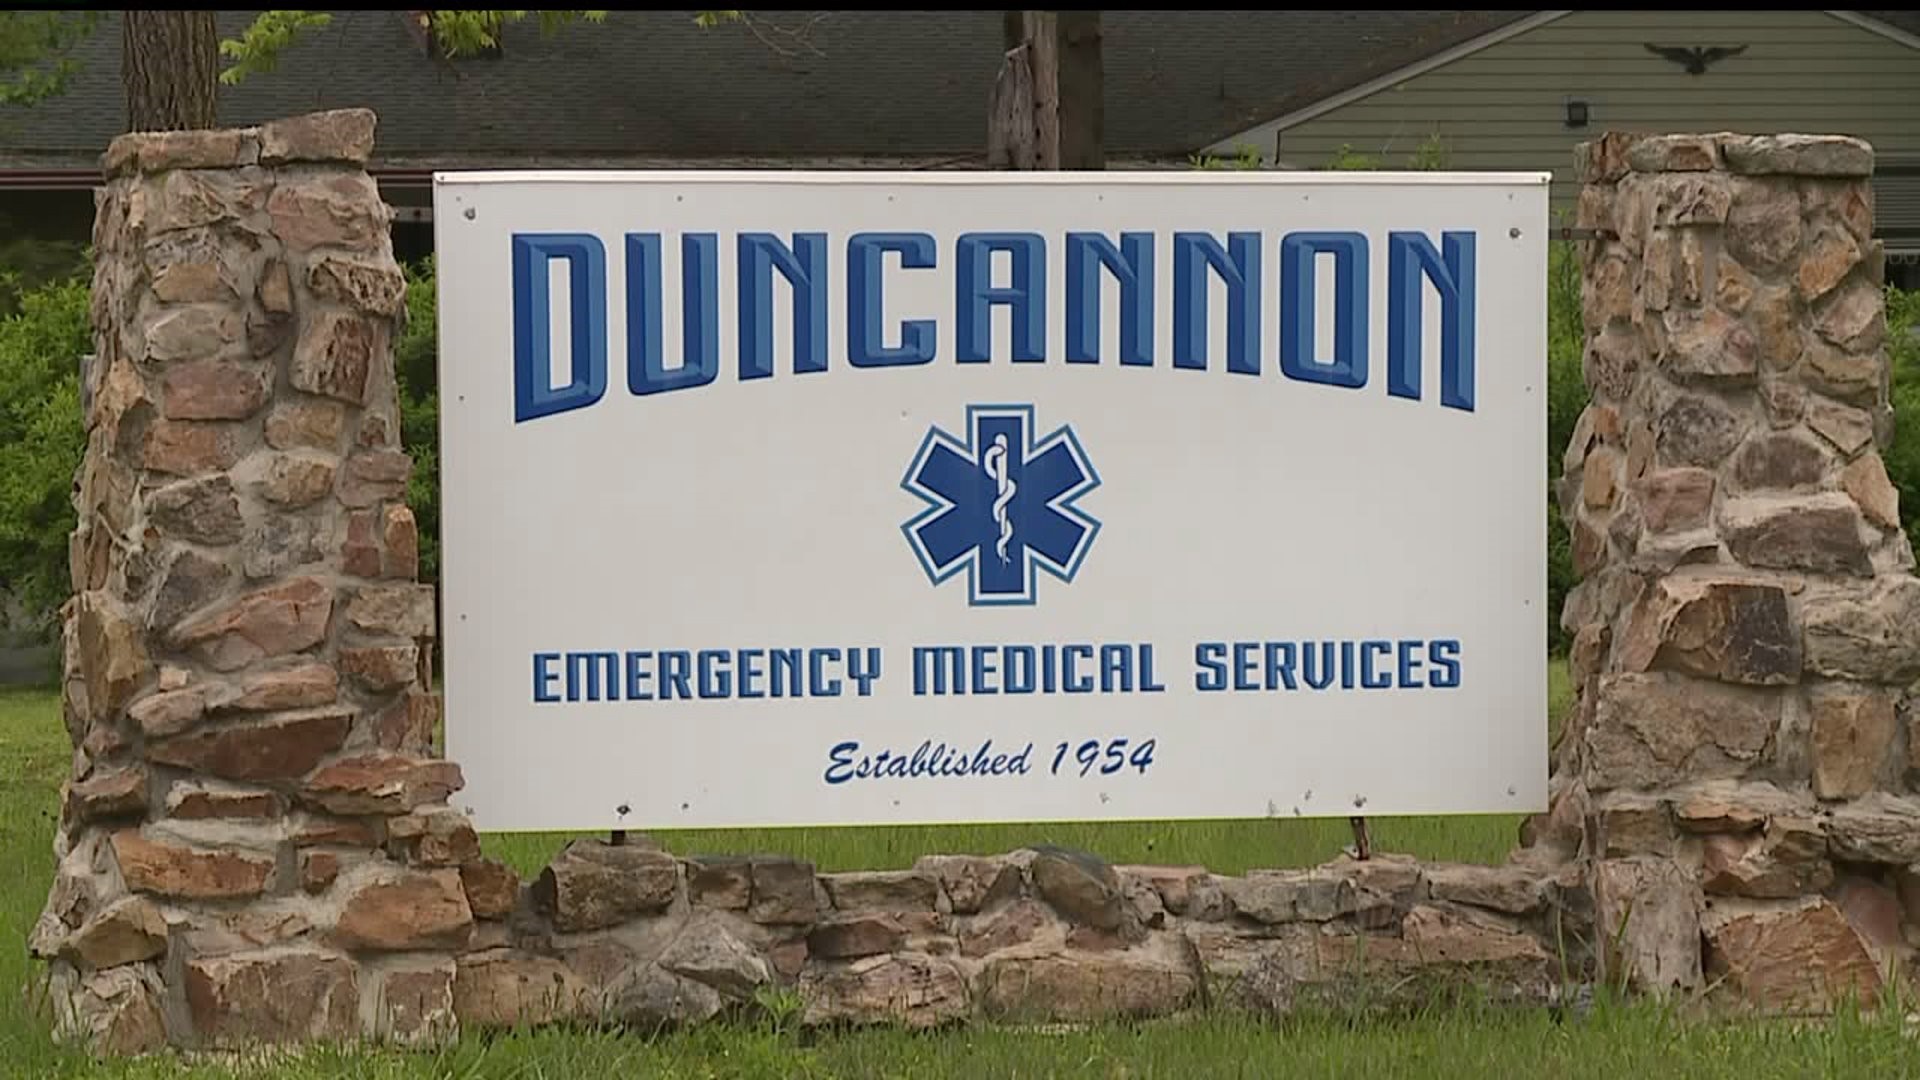 Lack of volunteers and funds could close EMS across Perry Co.